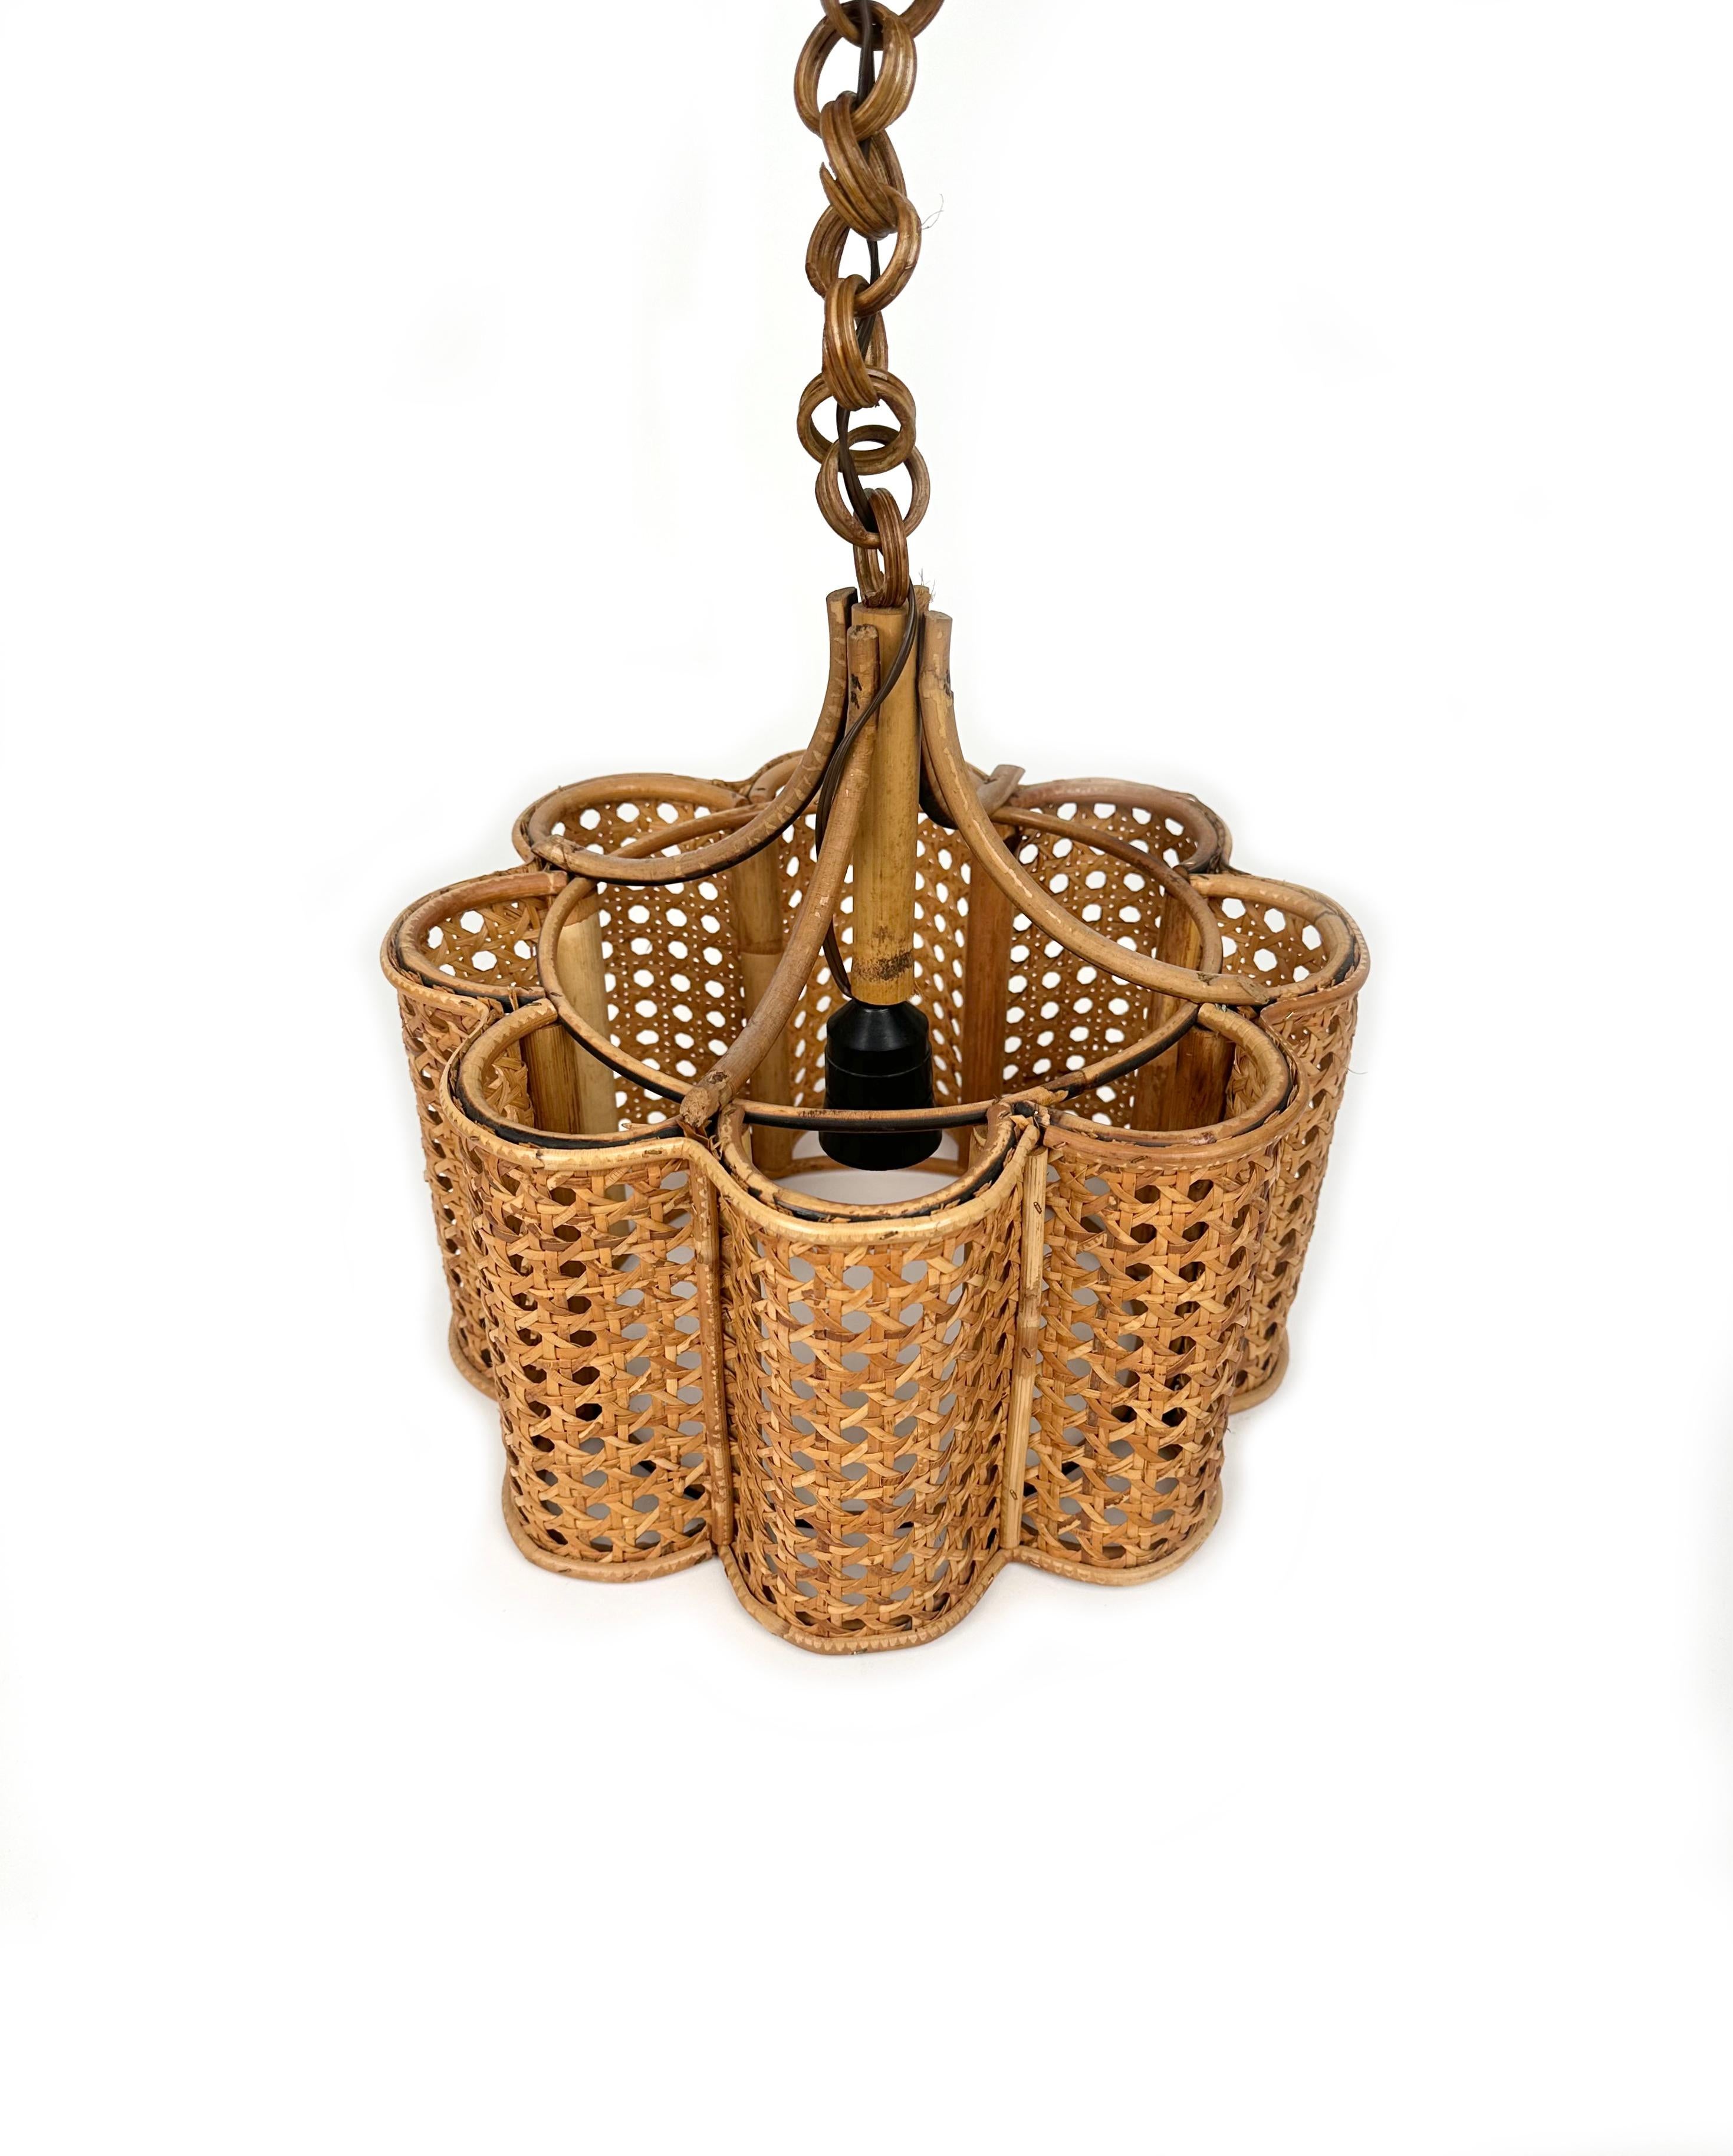 Bamboo Midcentury Rattan and Wicker Chandelier, Italy 1960s